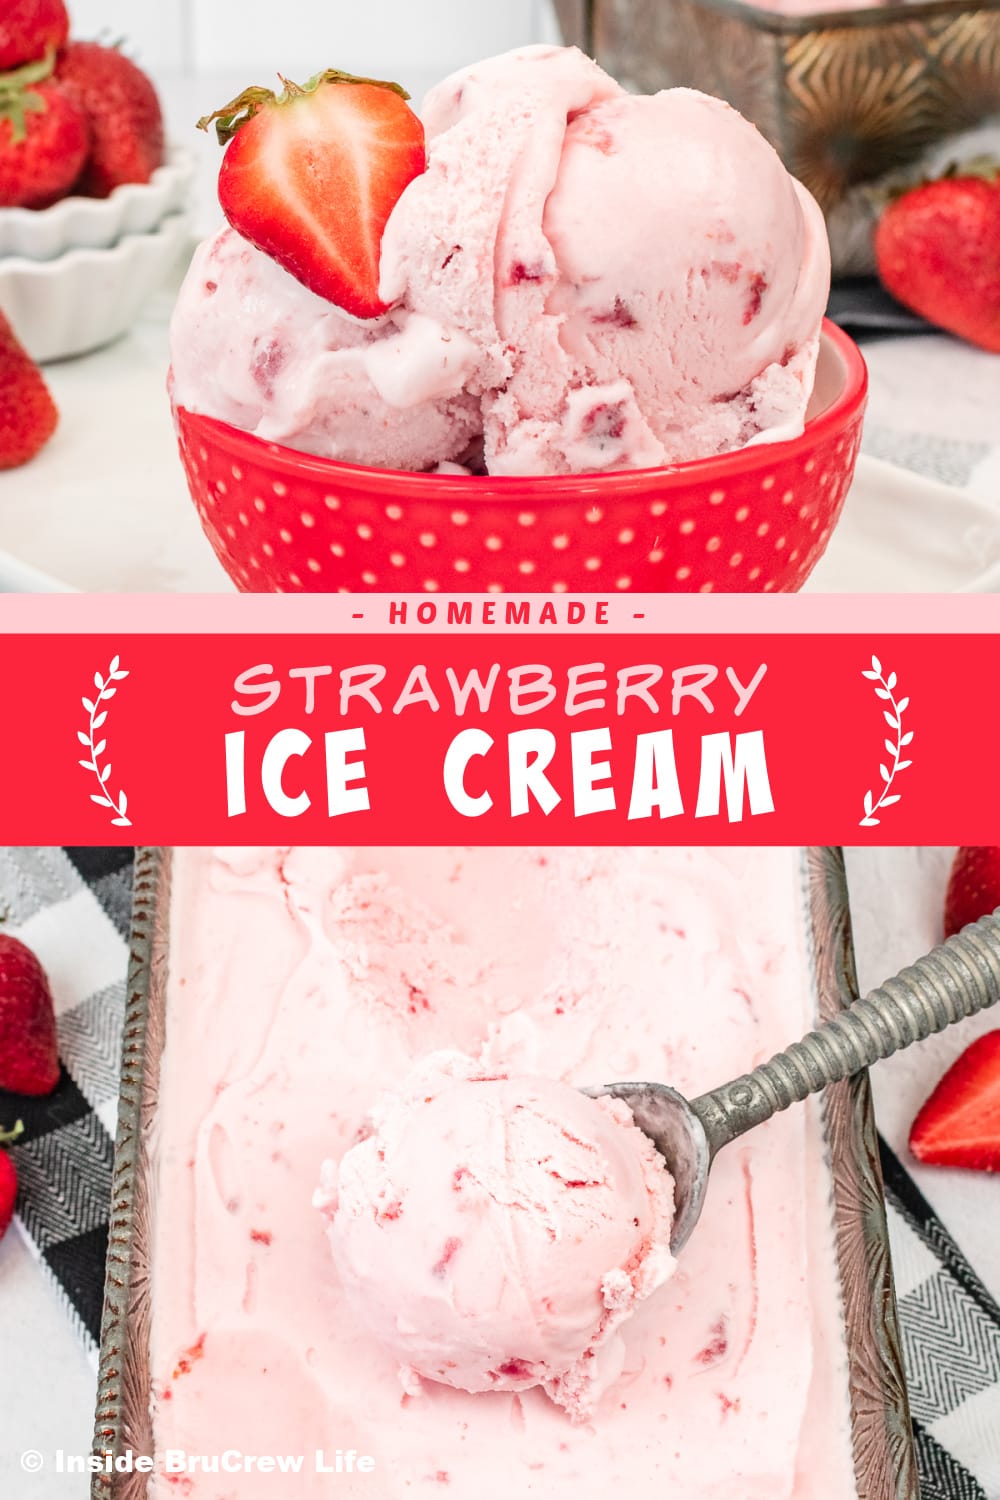 Two pictures of strawberry ice cream collaged together with a red text box.